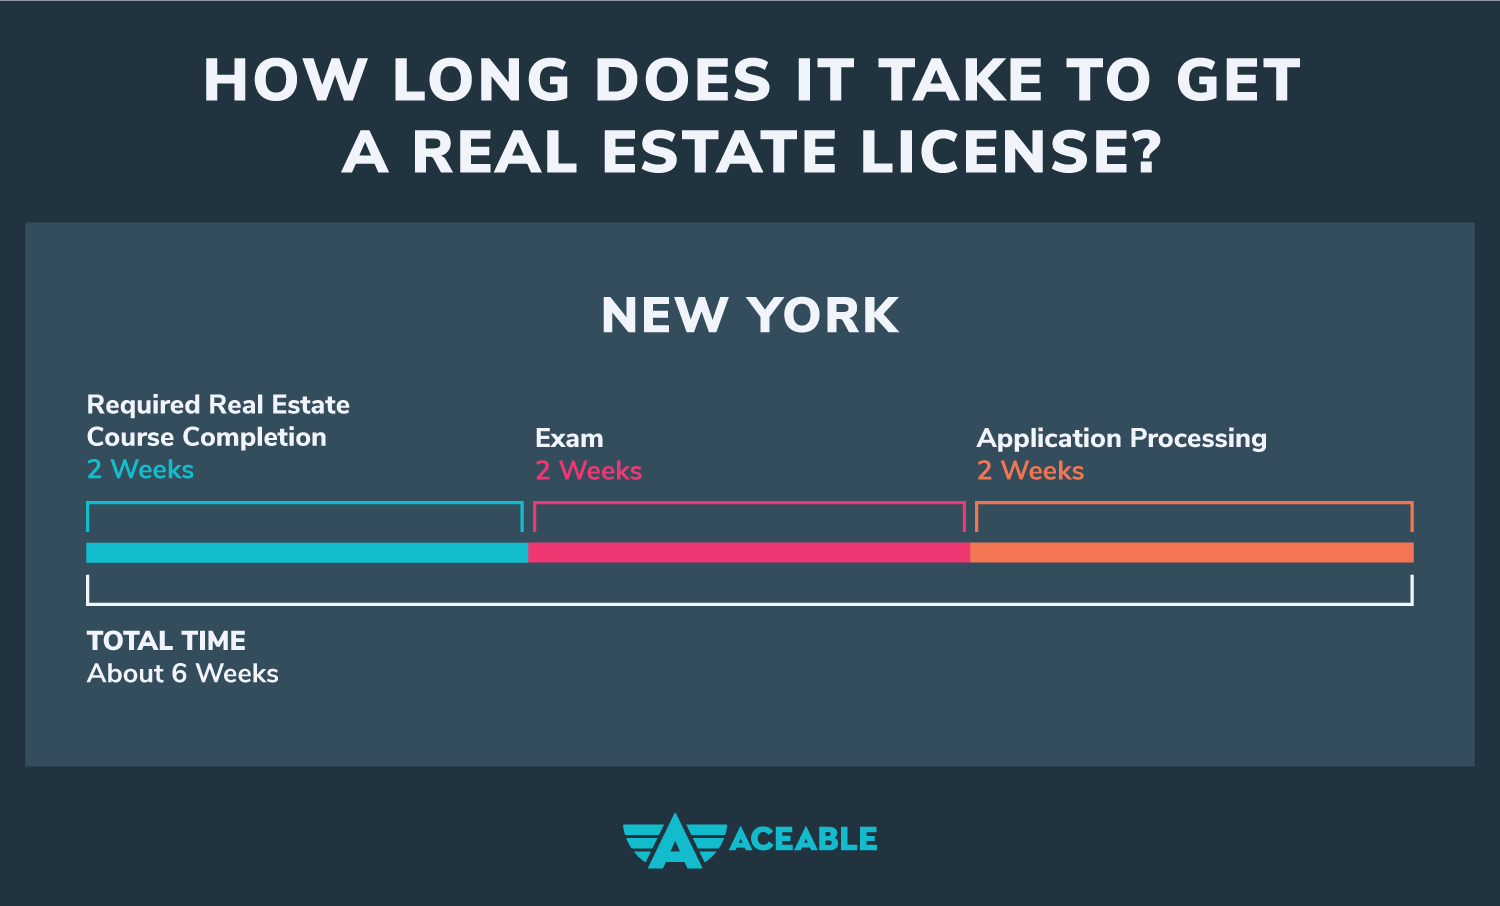 How Long Does it Take to Get a Real Estate License in New York?